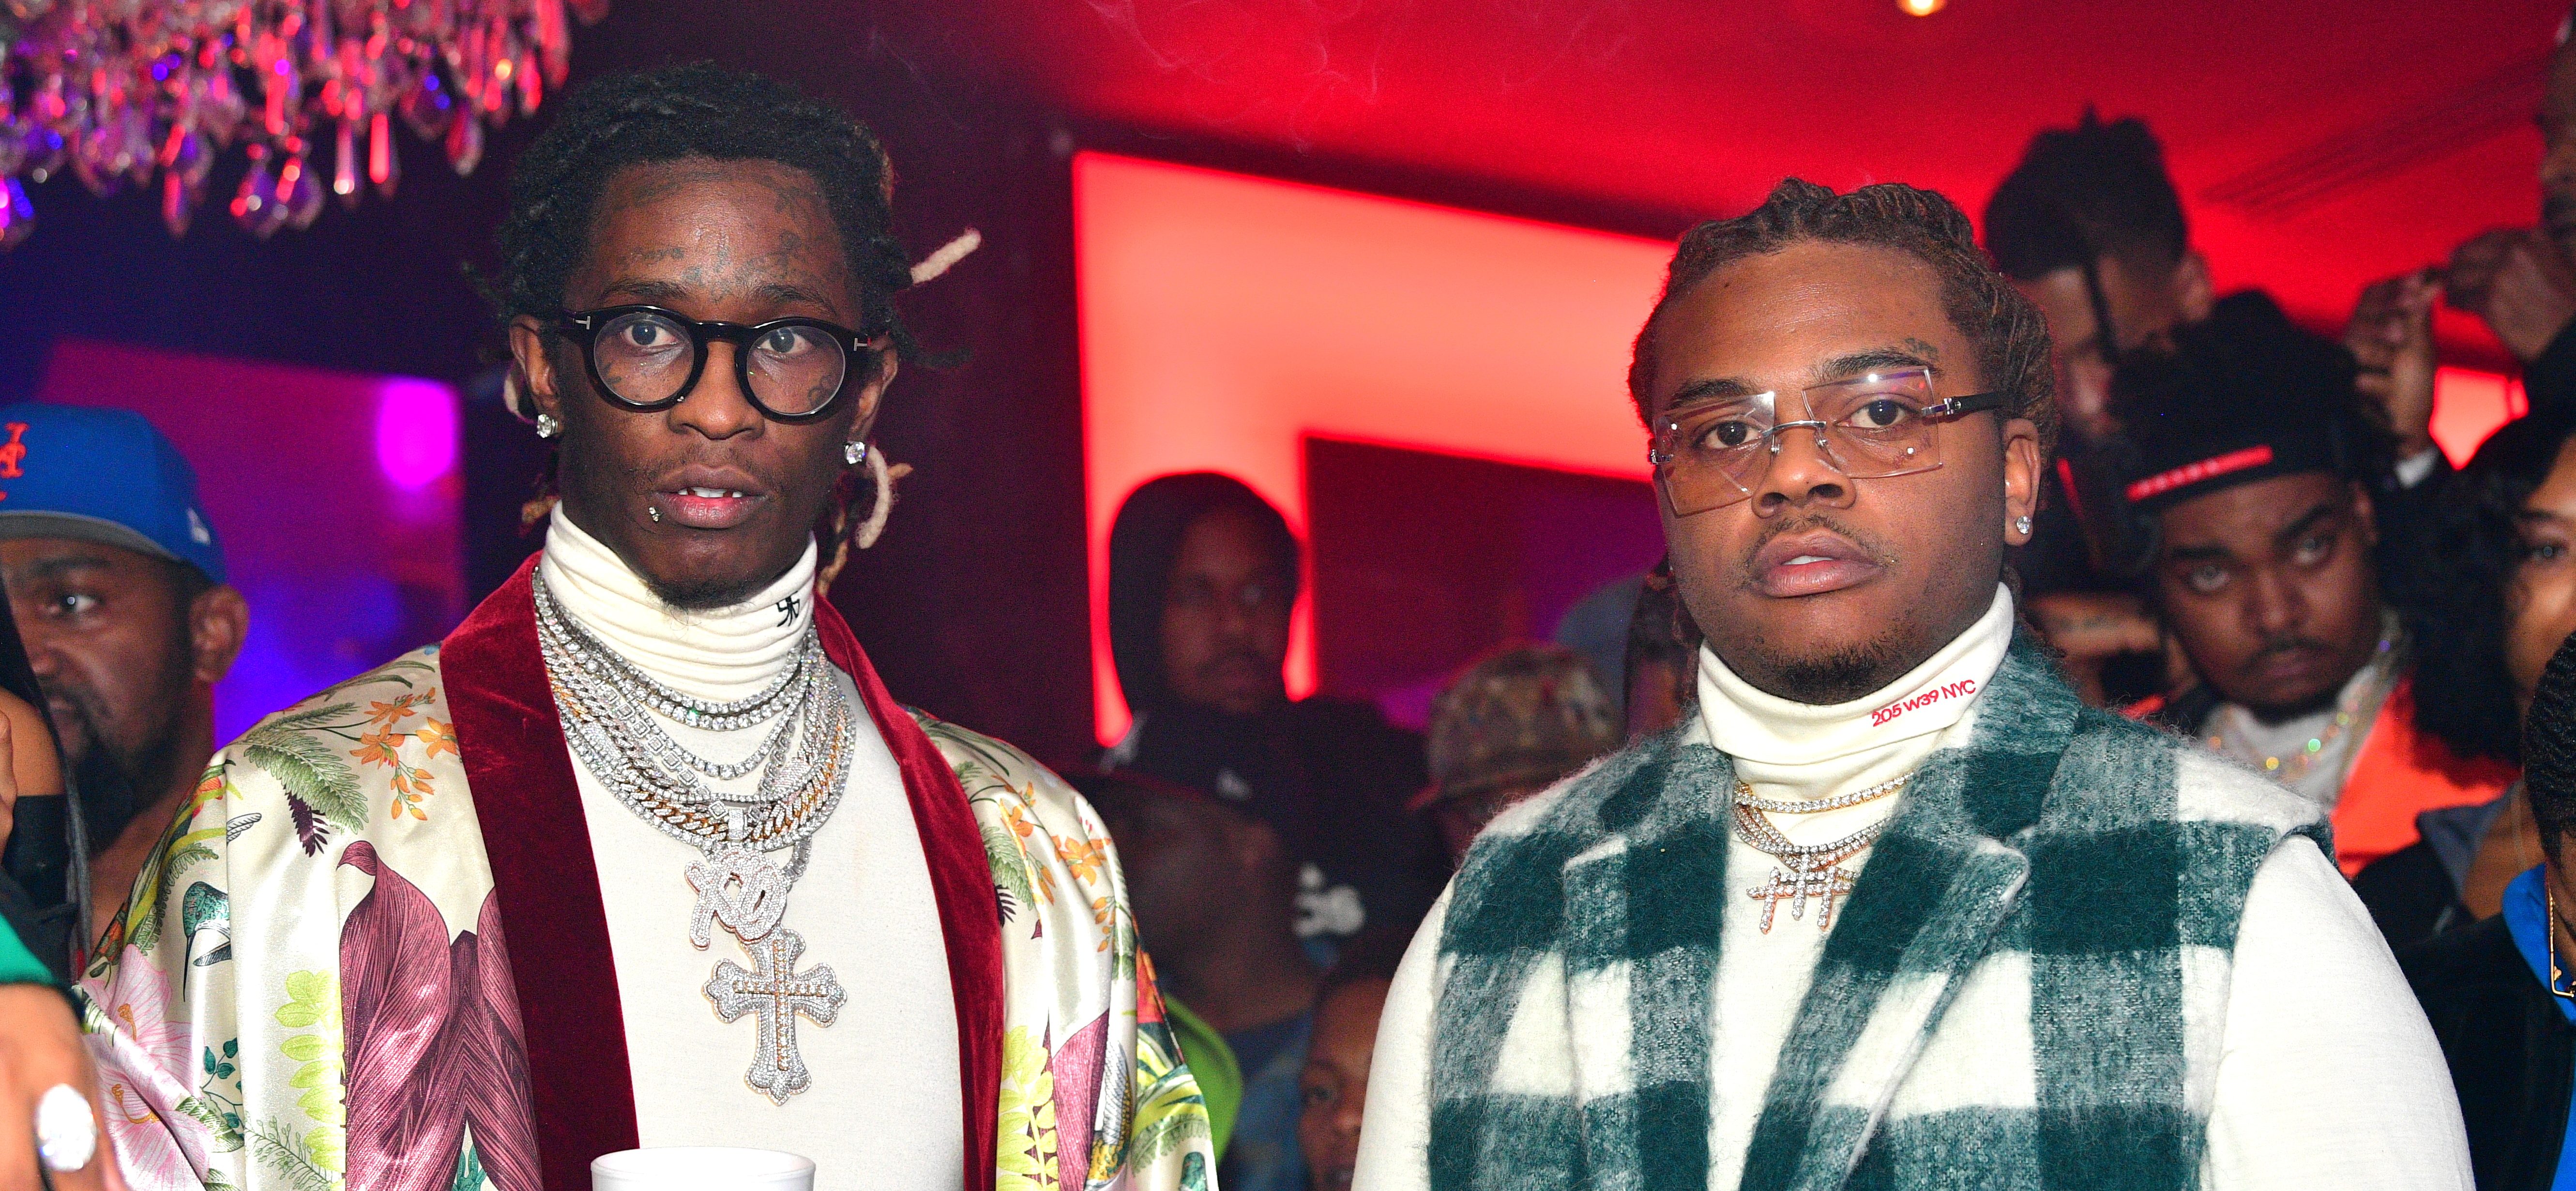 Young Thug Adds Gunna’s Music To His Instagram Bio